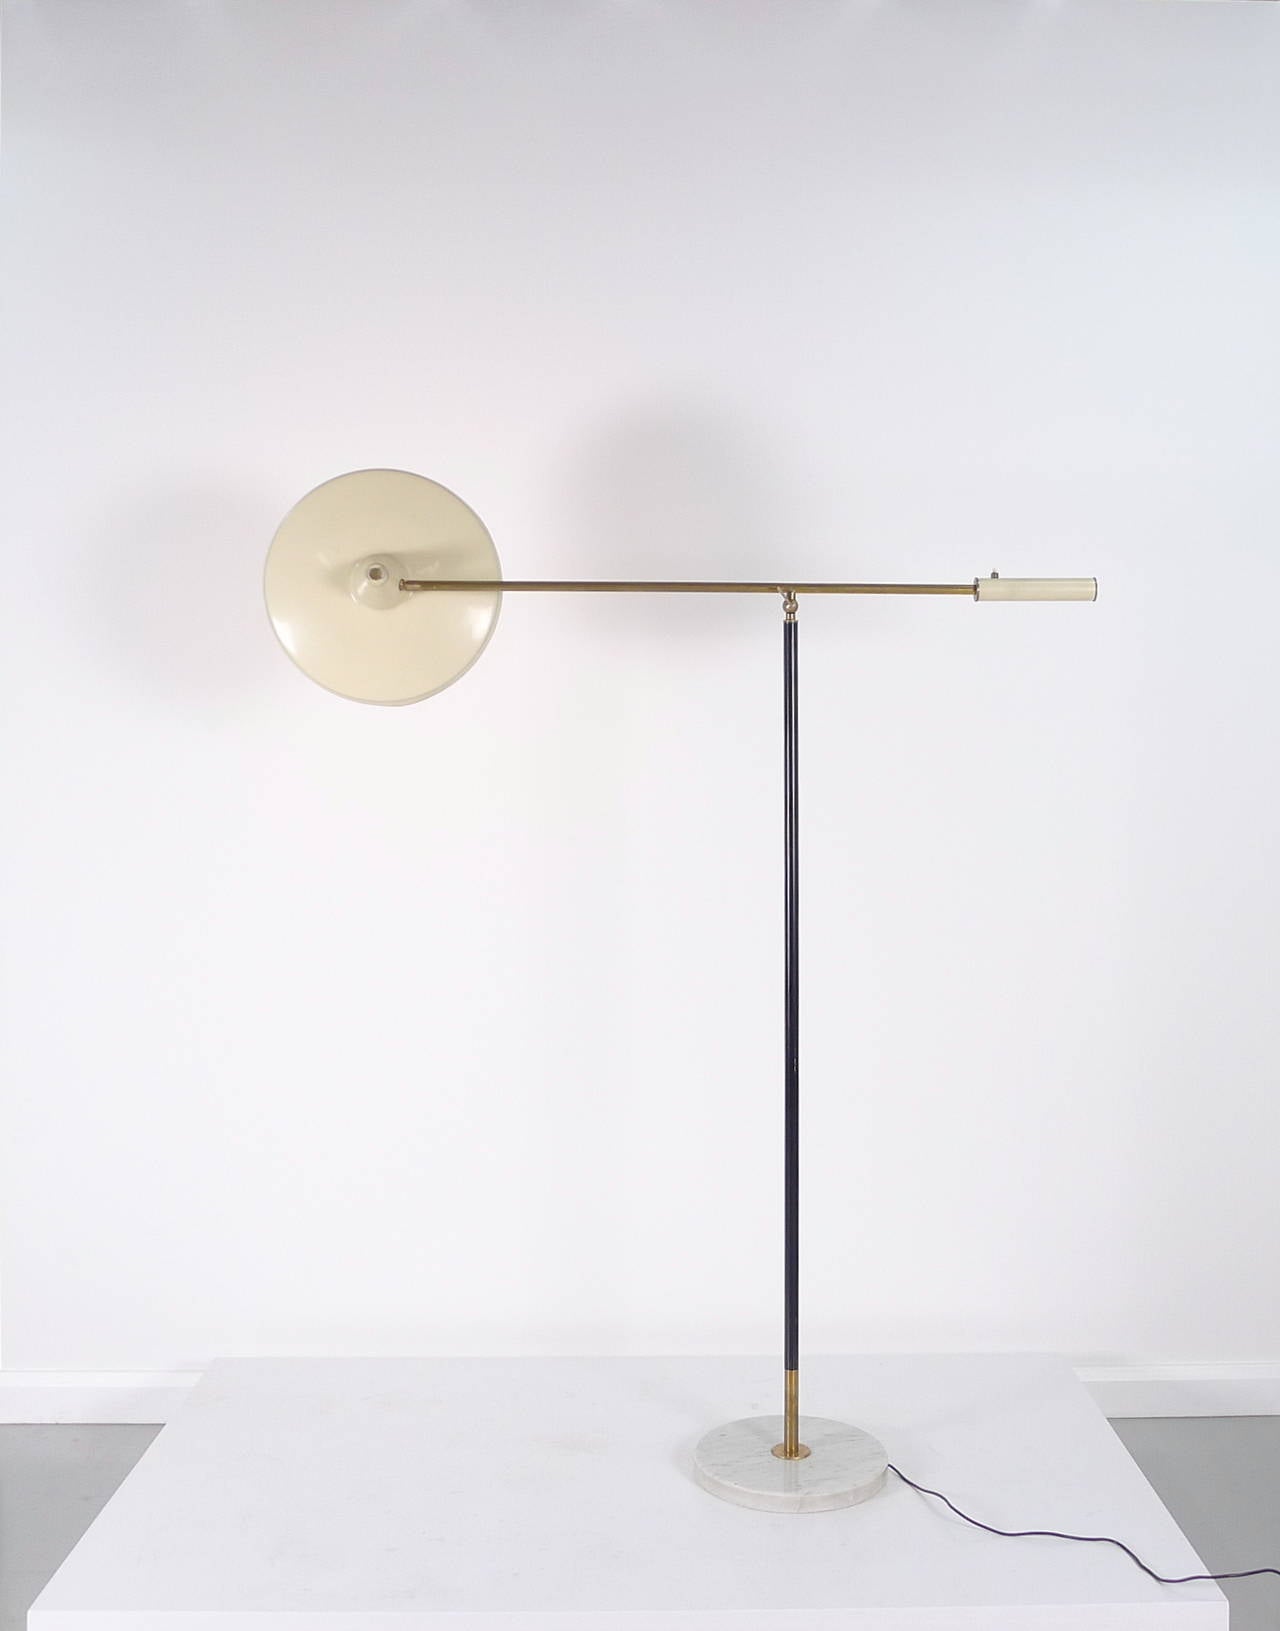 Stunning Stilnovo, Italy, floor lamp, 1950s. Marble base supporting enamelled and brass upright, pivoting arm above with counterbalance retaining switch to on end and shade to the other, shade to arm also a pivot point.

Lamp is signed with the